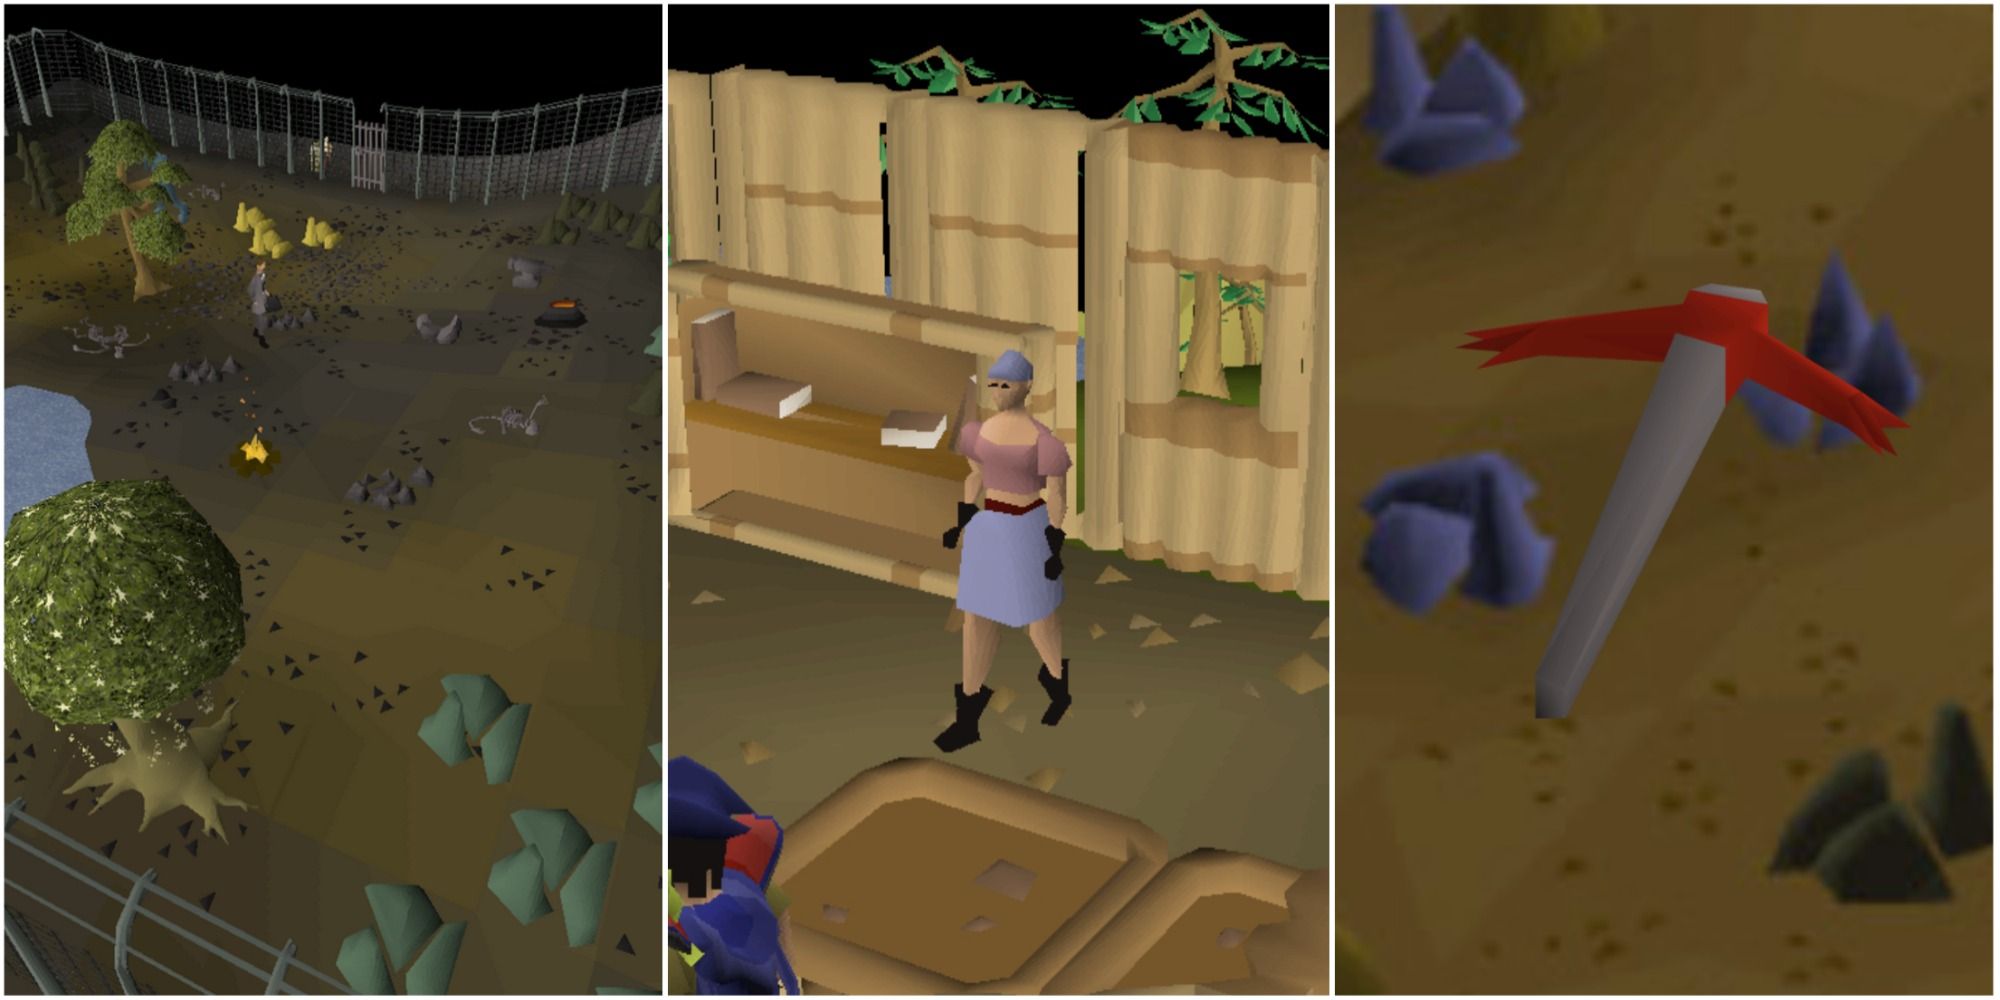 Old School RuneScape split feature image featuring screenshots of the Resource Area, Pirate Jackie The Fruit, and the Mining Guild